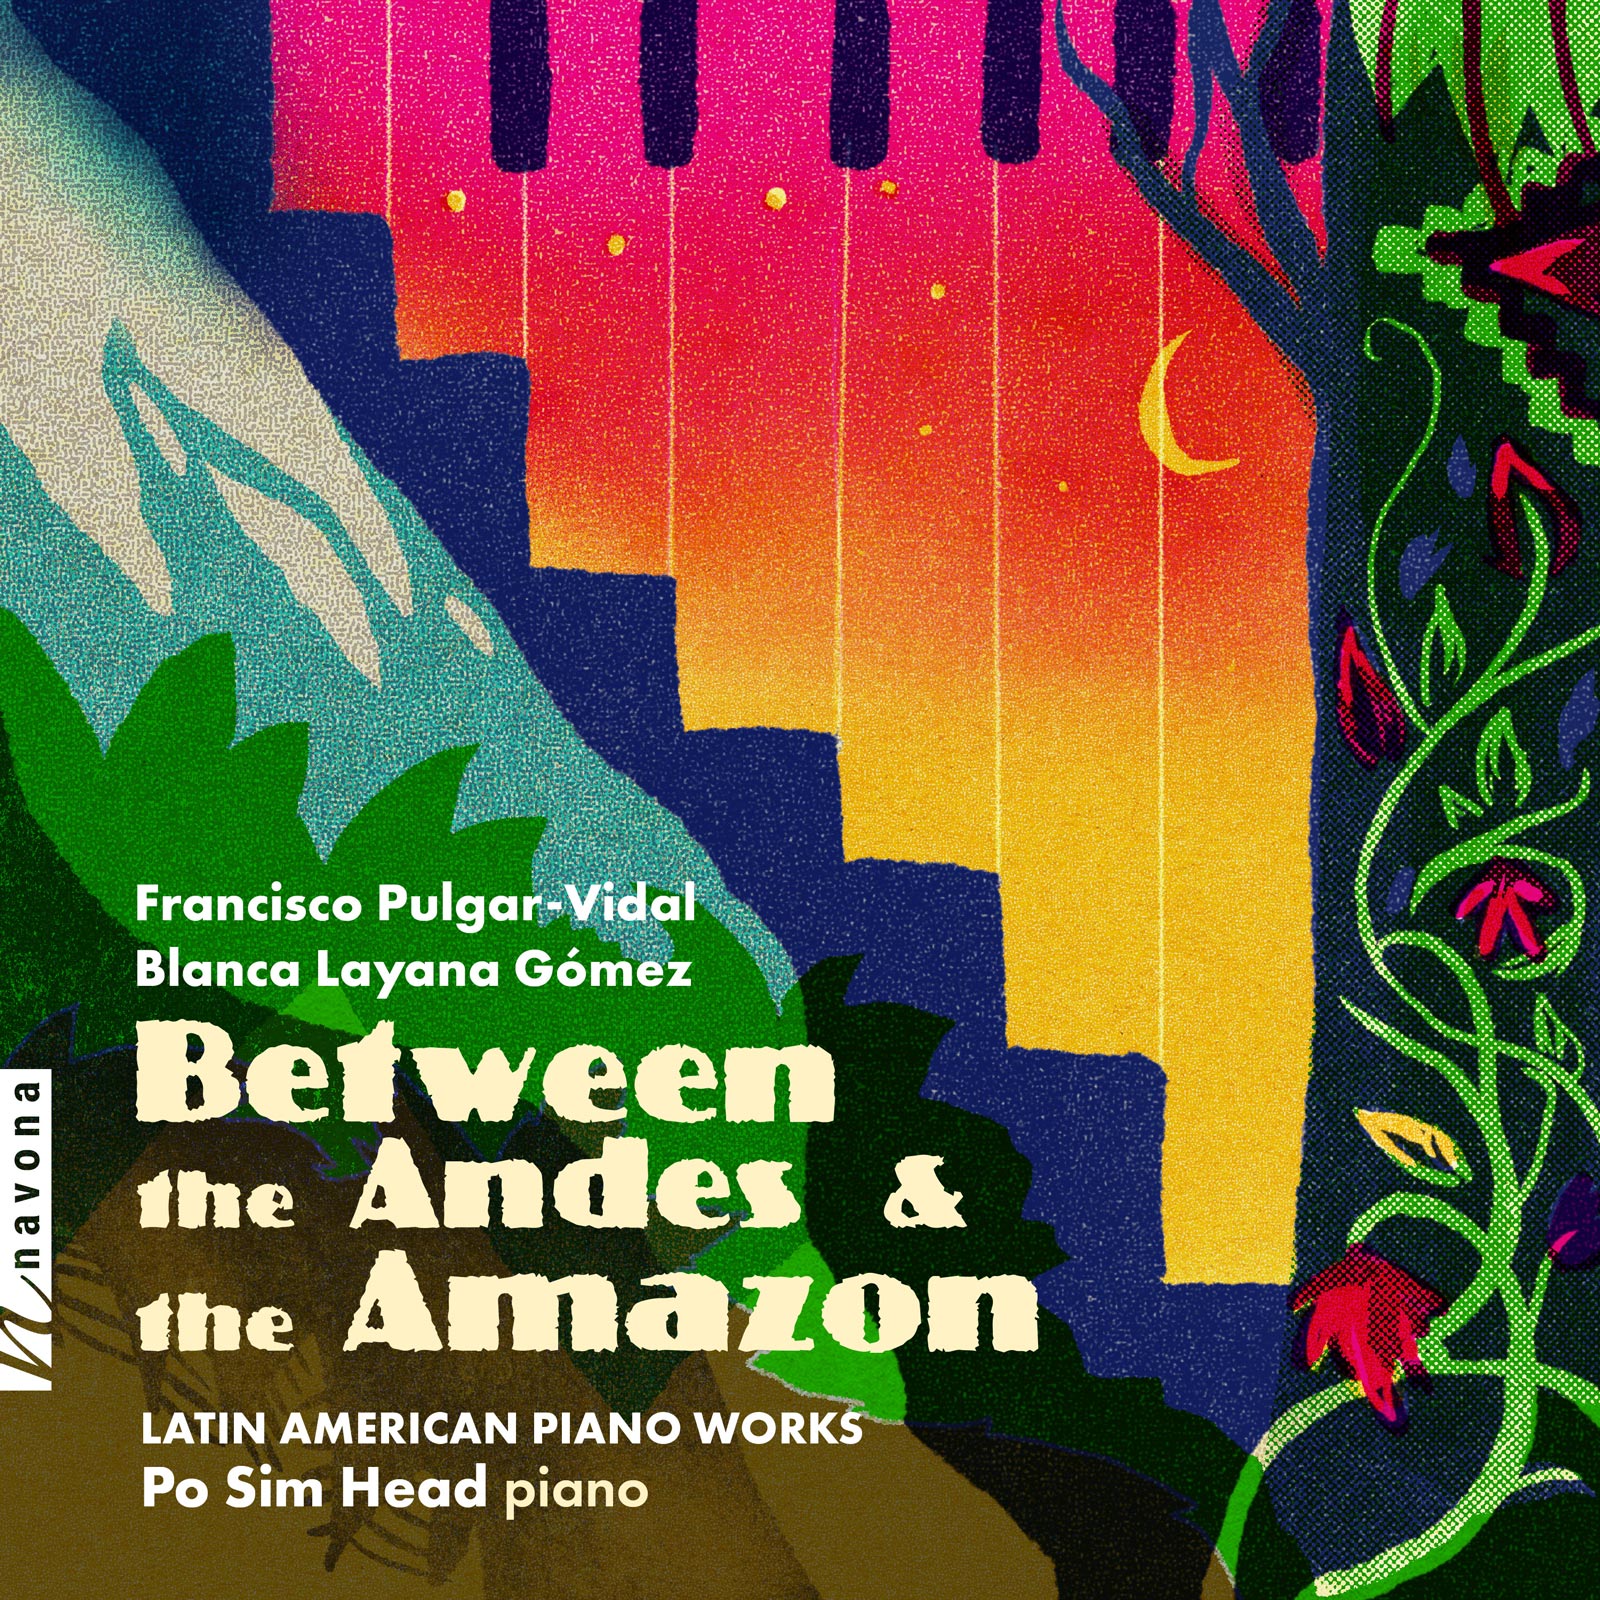 Between the Andes & the Amazon